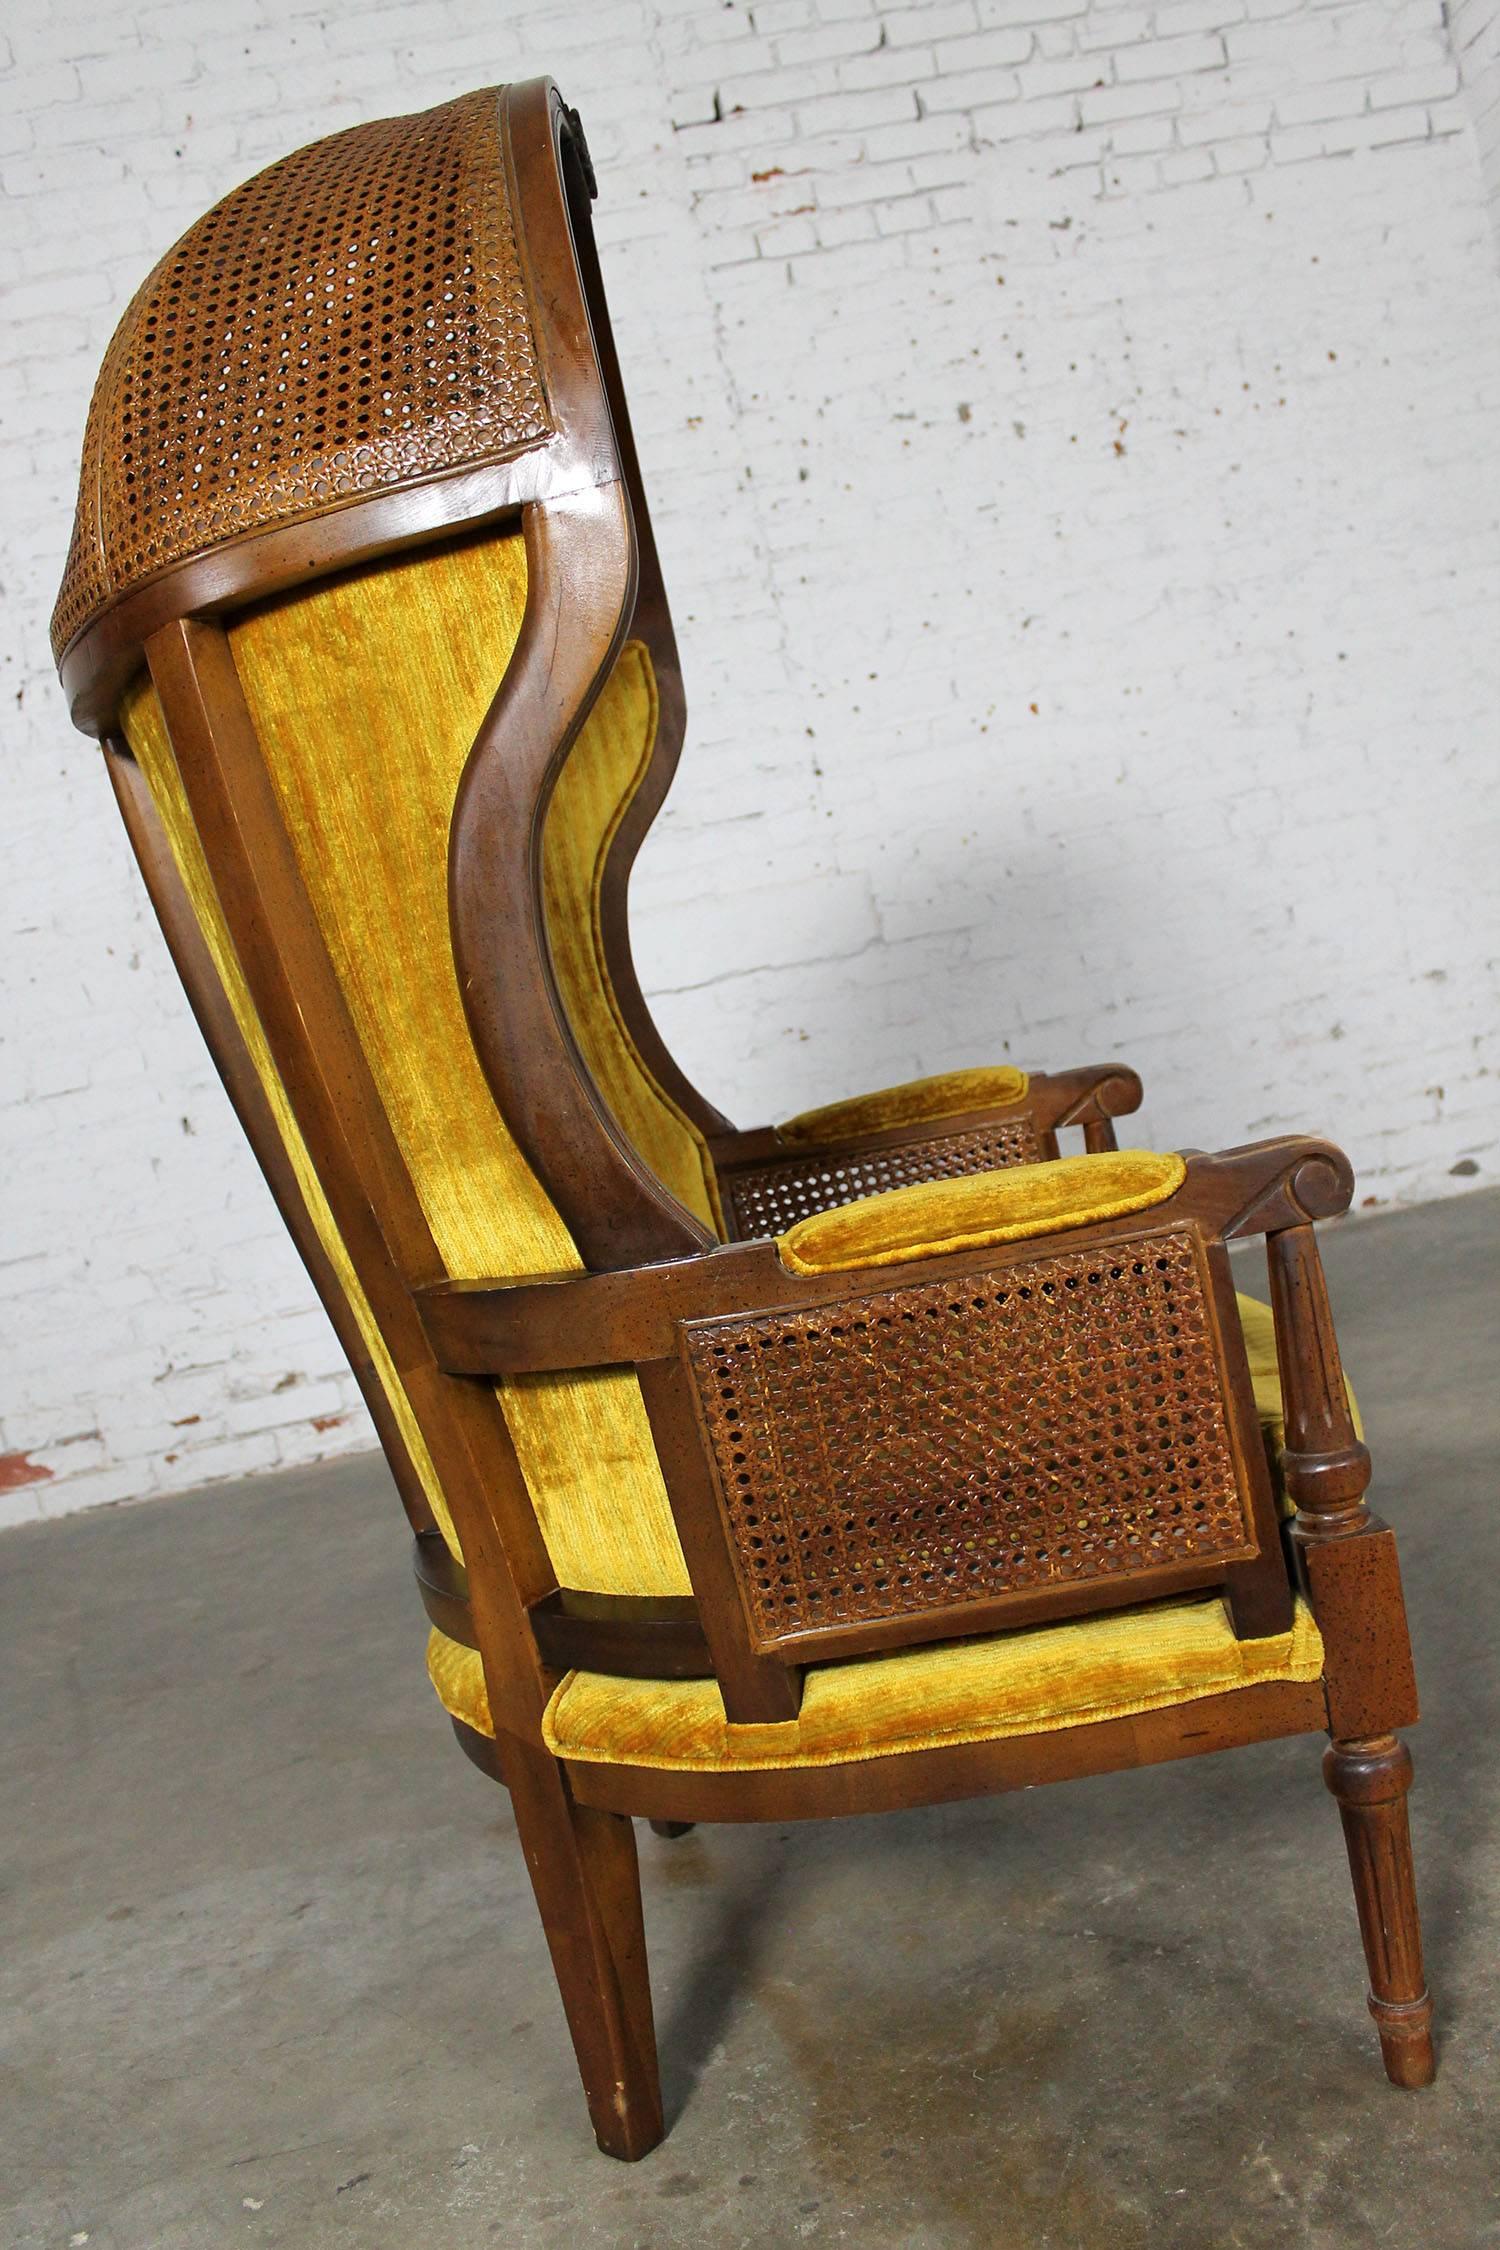 Vintage neoclassical style hooded cane porter’s chair in wonderful vintage condition. The original upholstery has no stains or tears and the caning in unharmed. There are small nicks and dings on the wood as you would expect with age but nothing